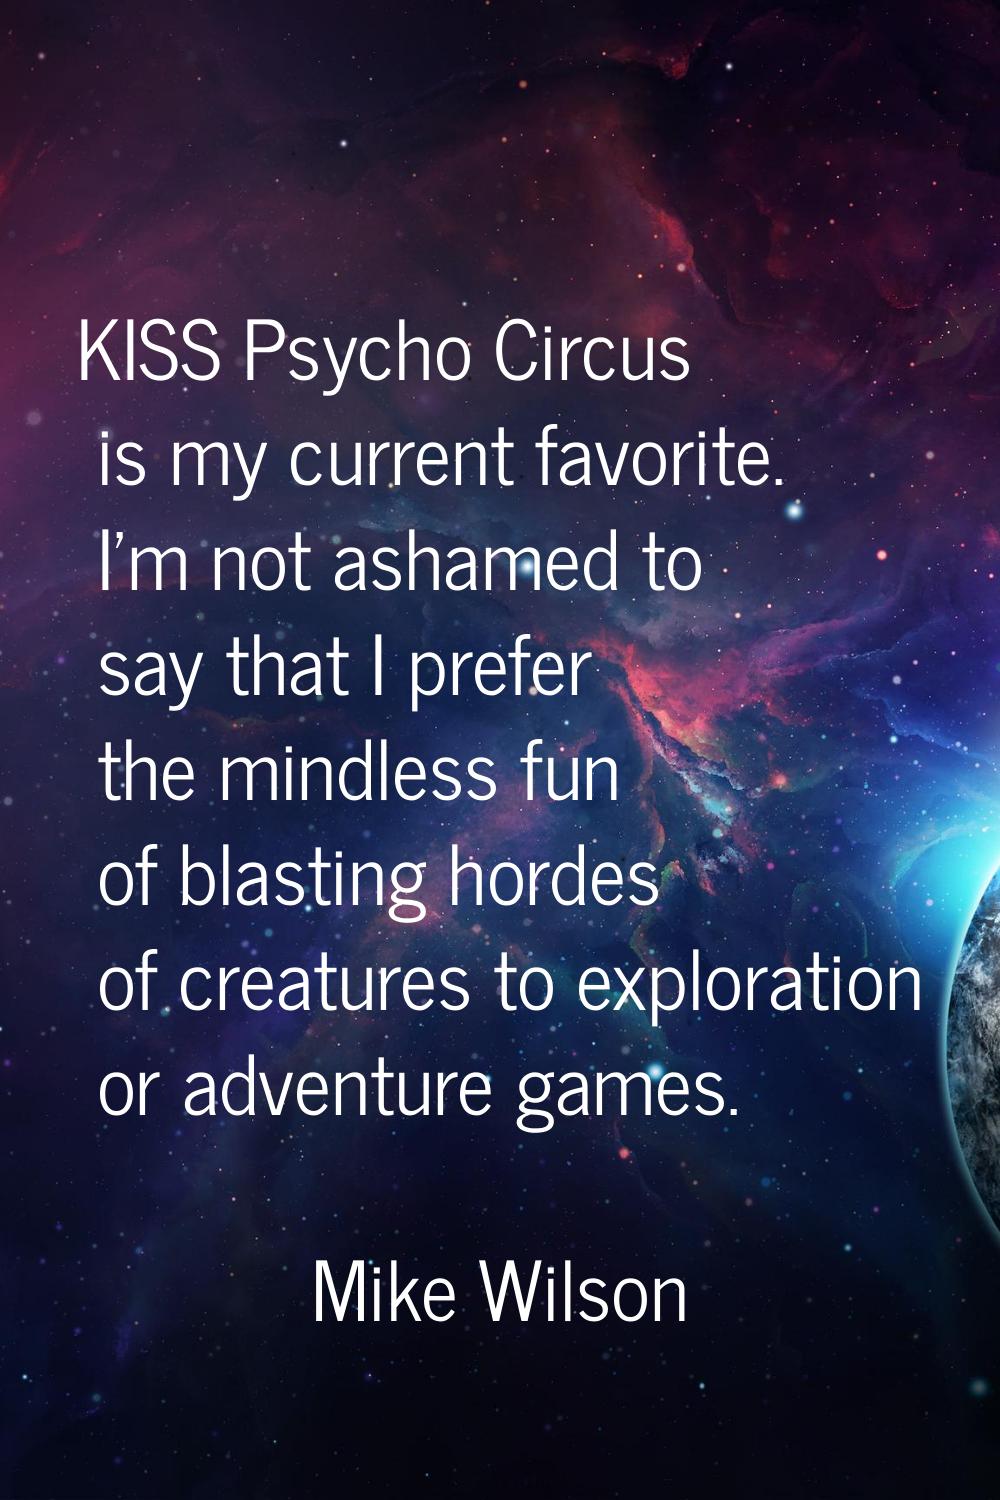 KISS Psycho Circus is my current favorite. I'm not ashamed to say that I prefer the mindless fun of